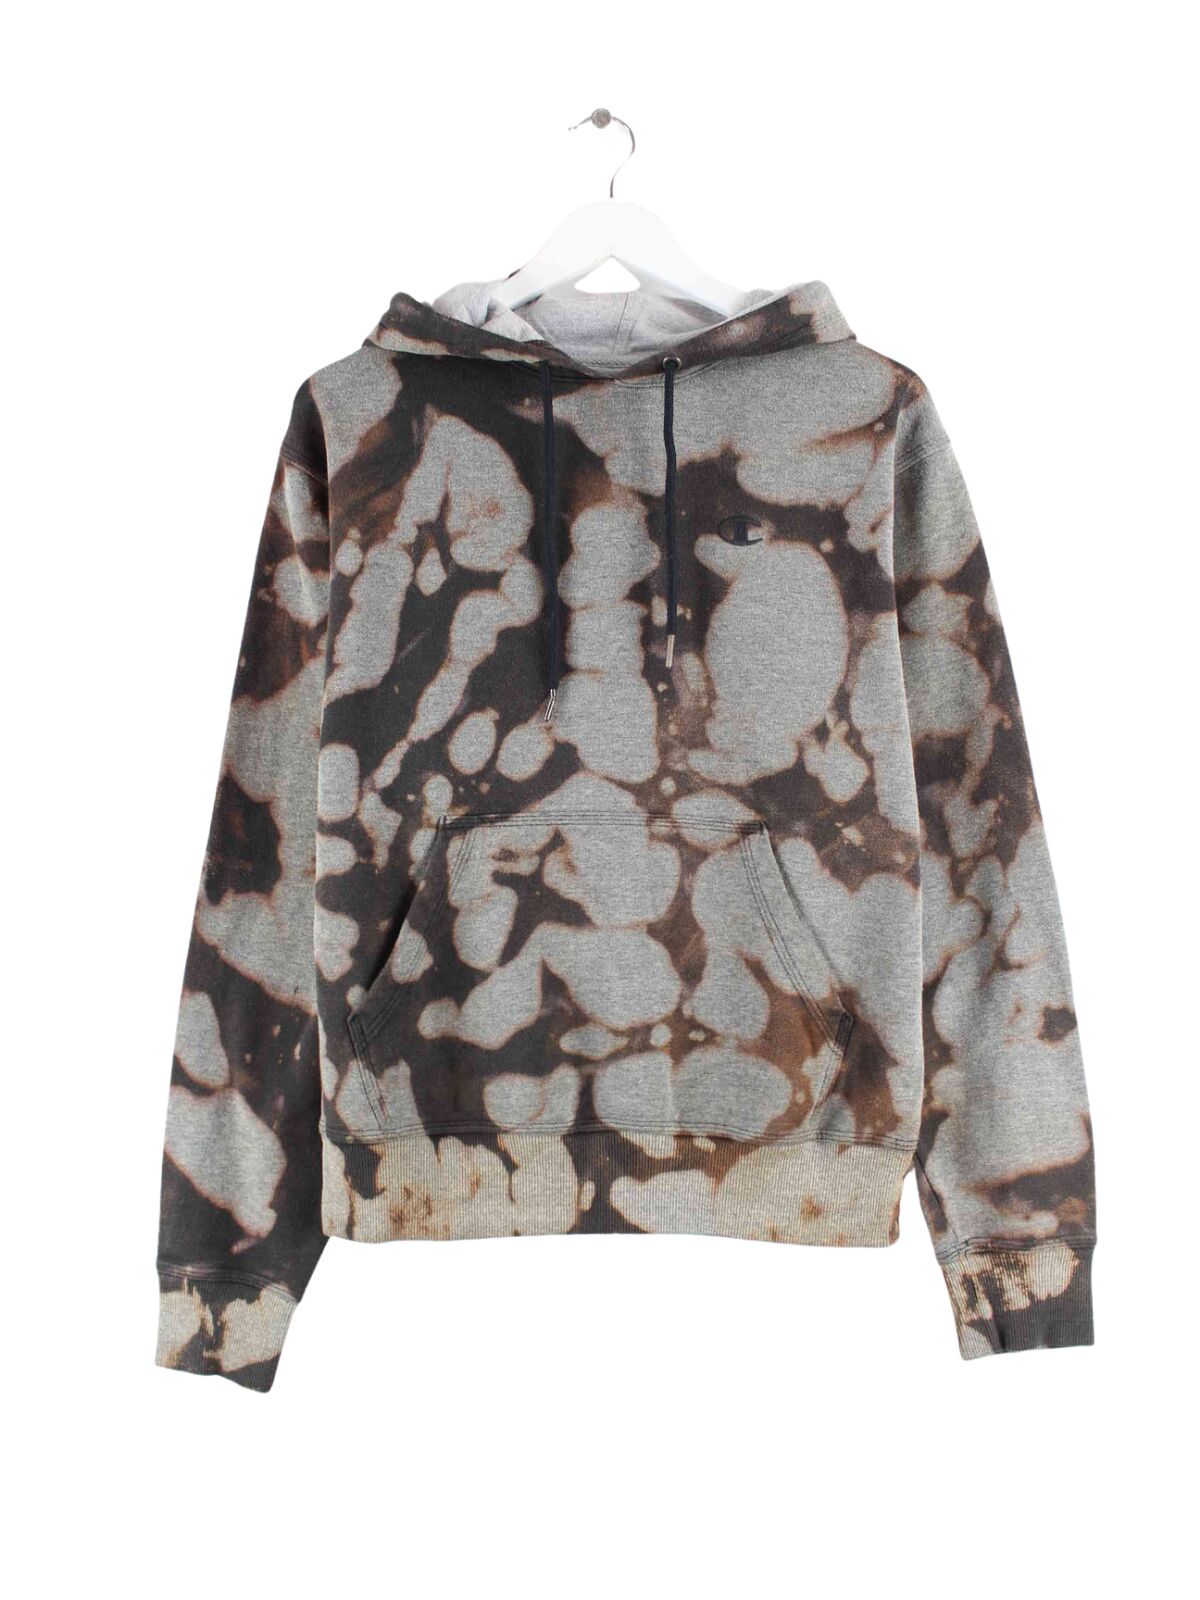 Champion Embroidered Tie Dye Hoodie Grau S (front image)